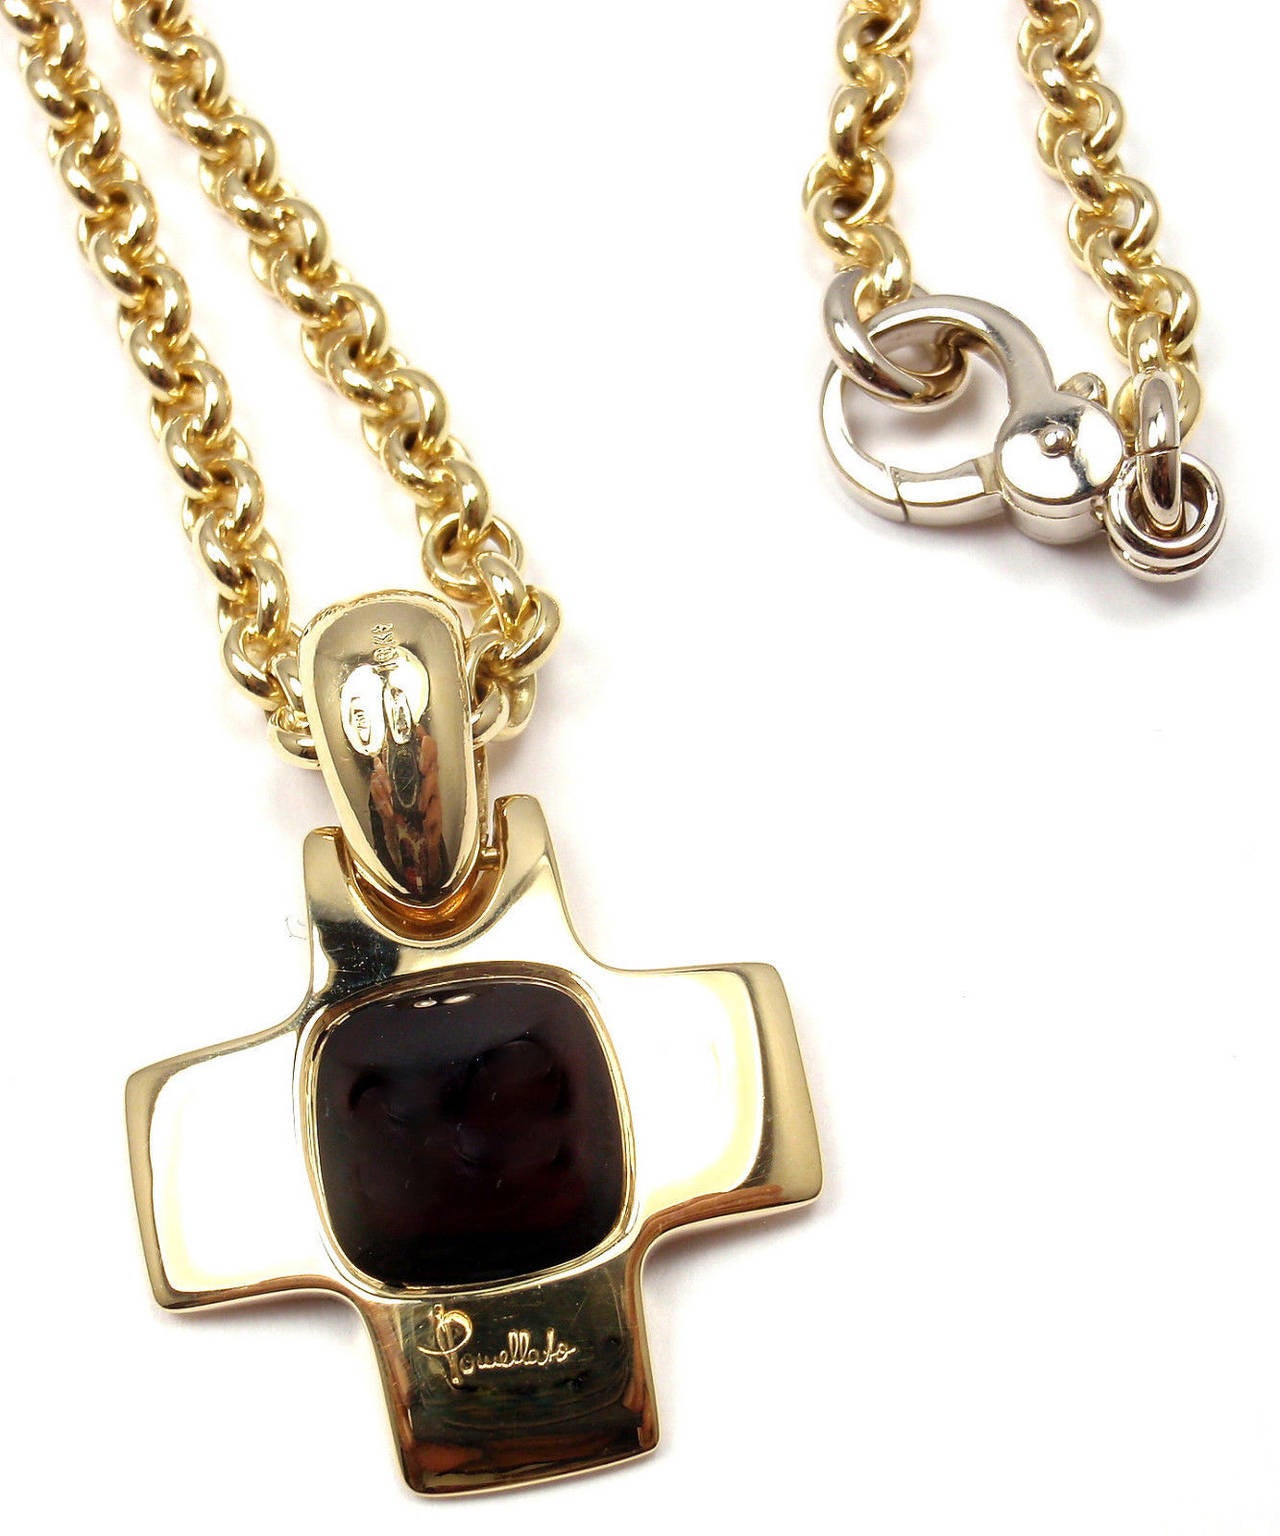 18k Yellow Gold Garnet Cross Pendant Link Necklace by Pomellato. 
With One garnet 11mm x 11mm

This necklace comes with original box and certificate.

Details: 
Weight: 37.9 grams
Chain - Length: 16